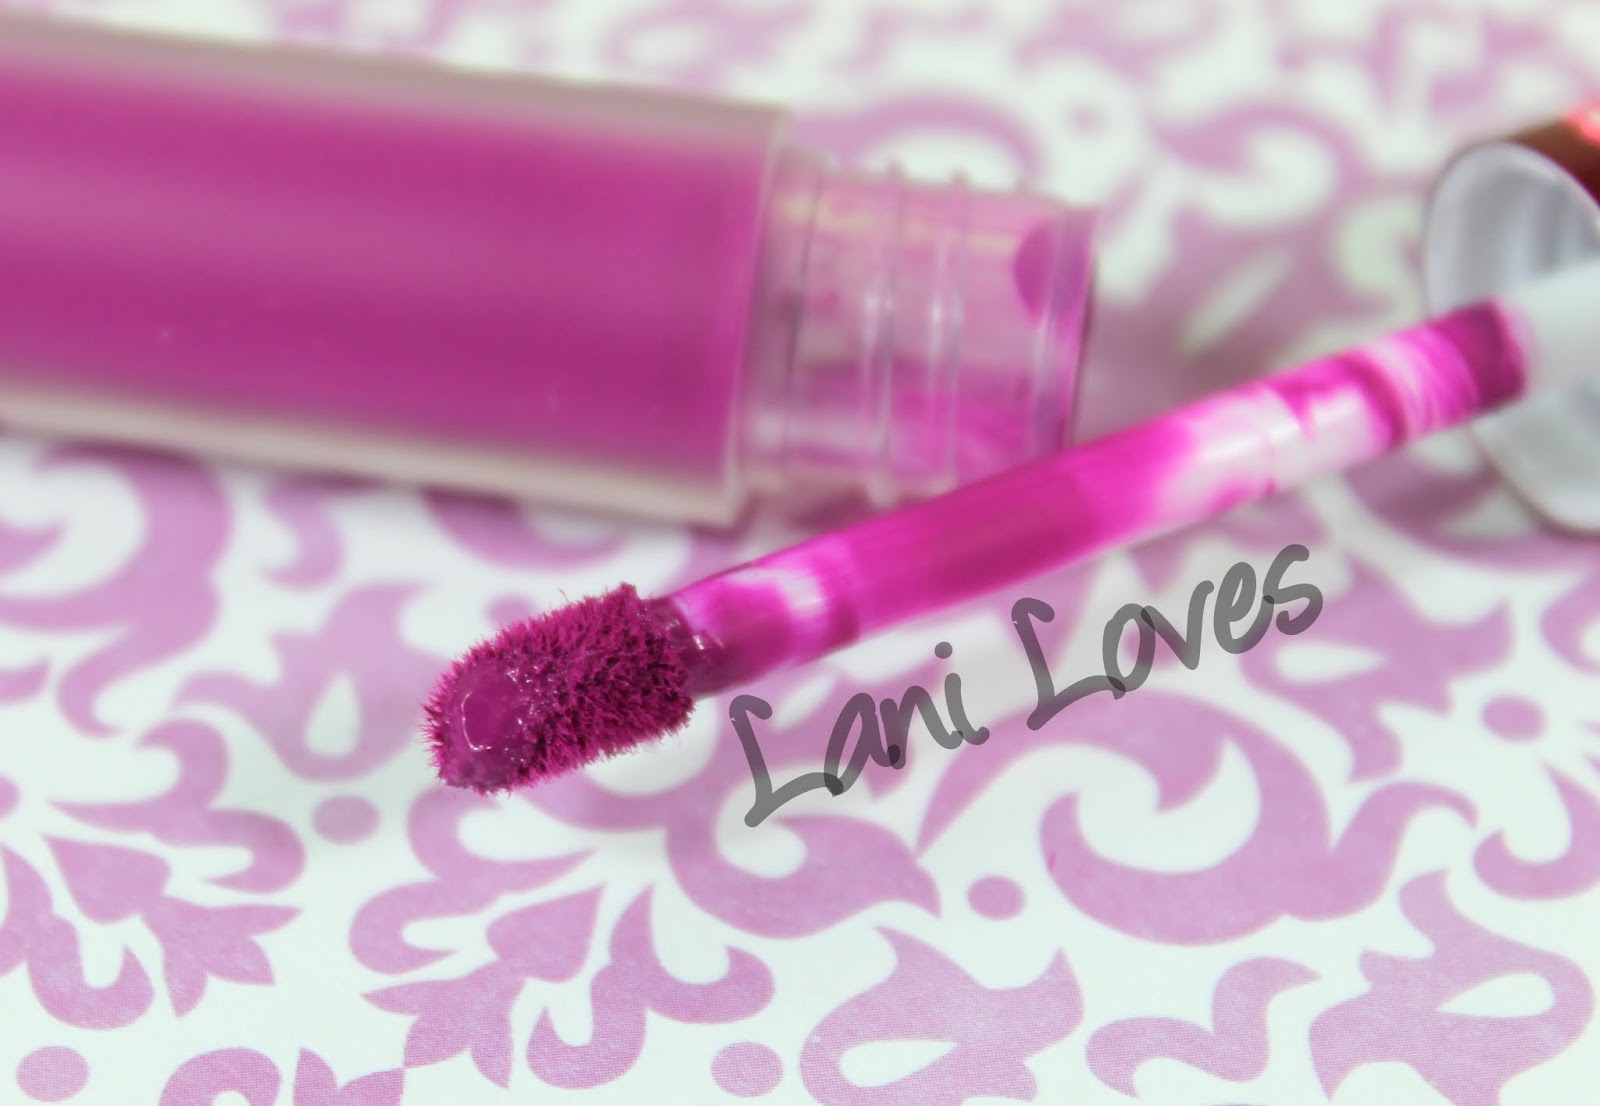 Lime Crime Velvetine - Utopia Swatches & Review